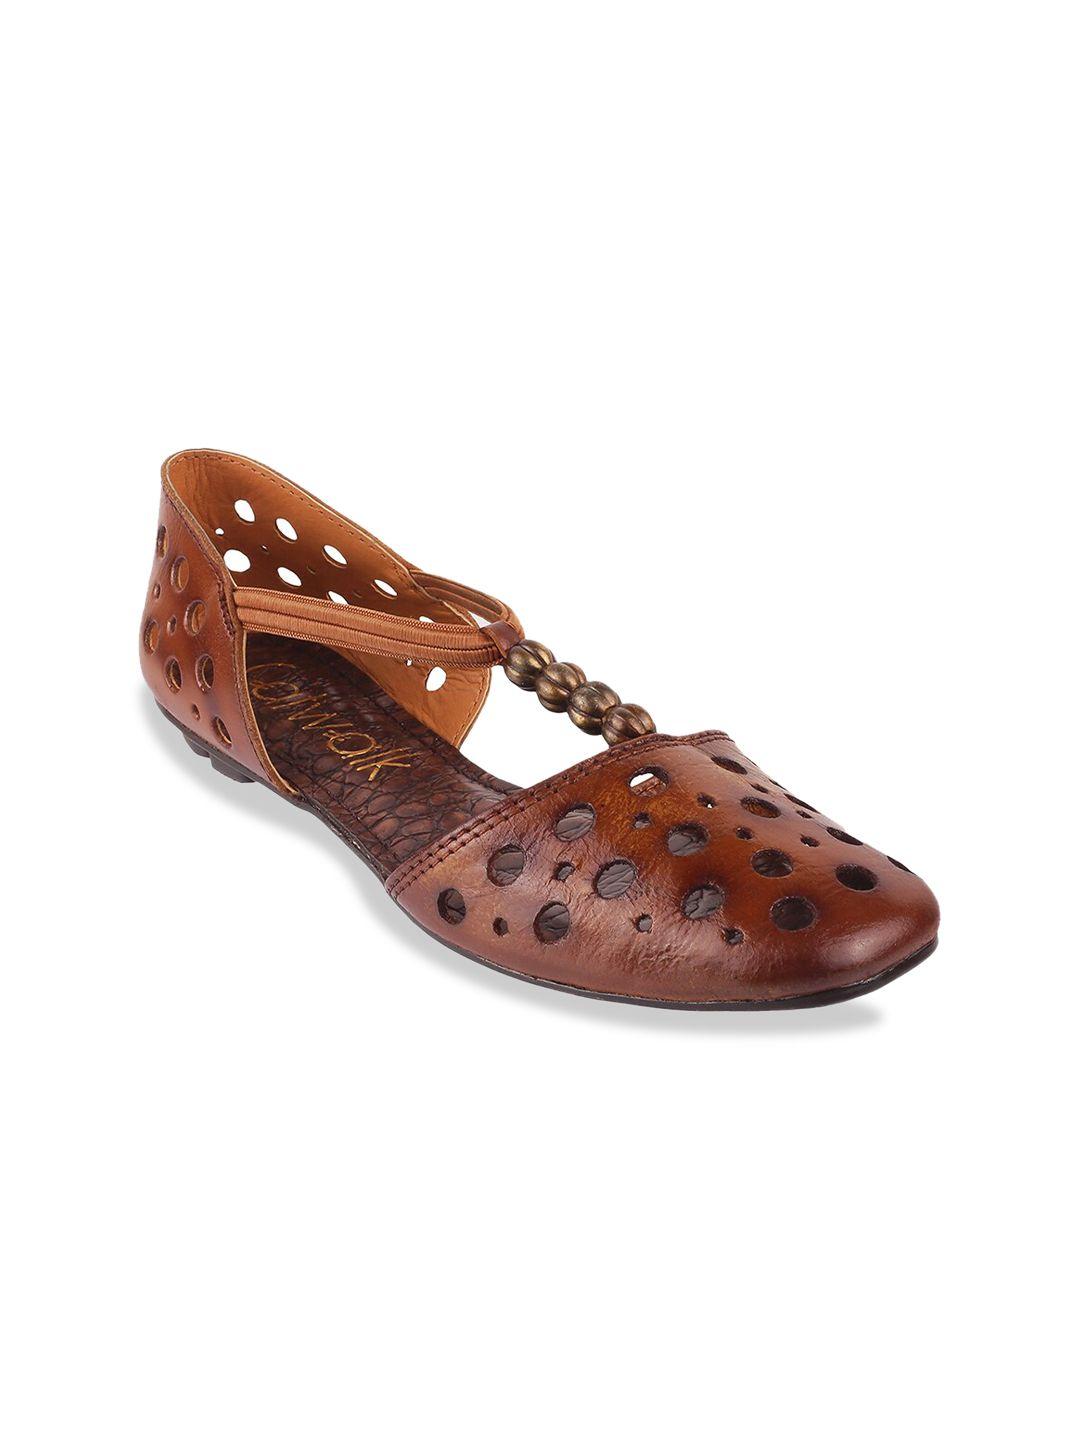 catwalk-women-tan-woven-design-mules-with-laser-cuts-leather-flats